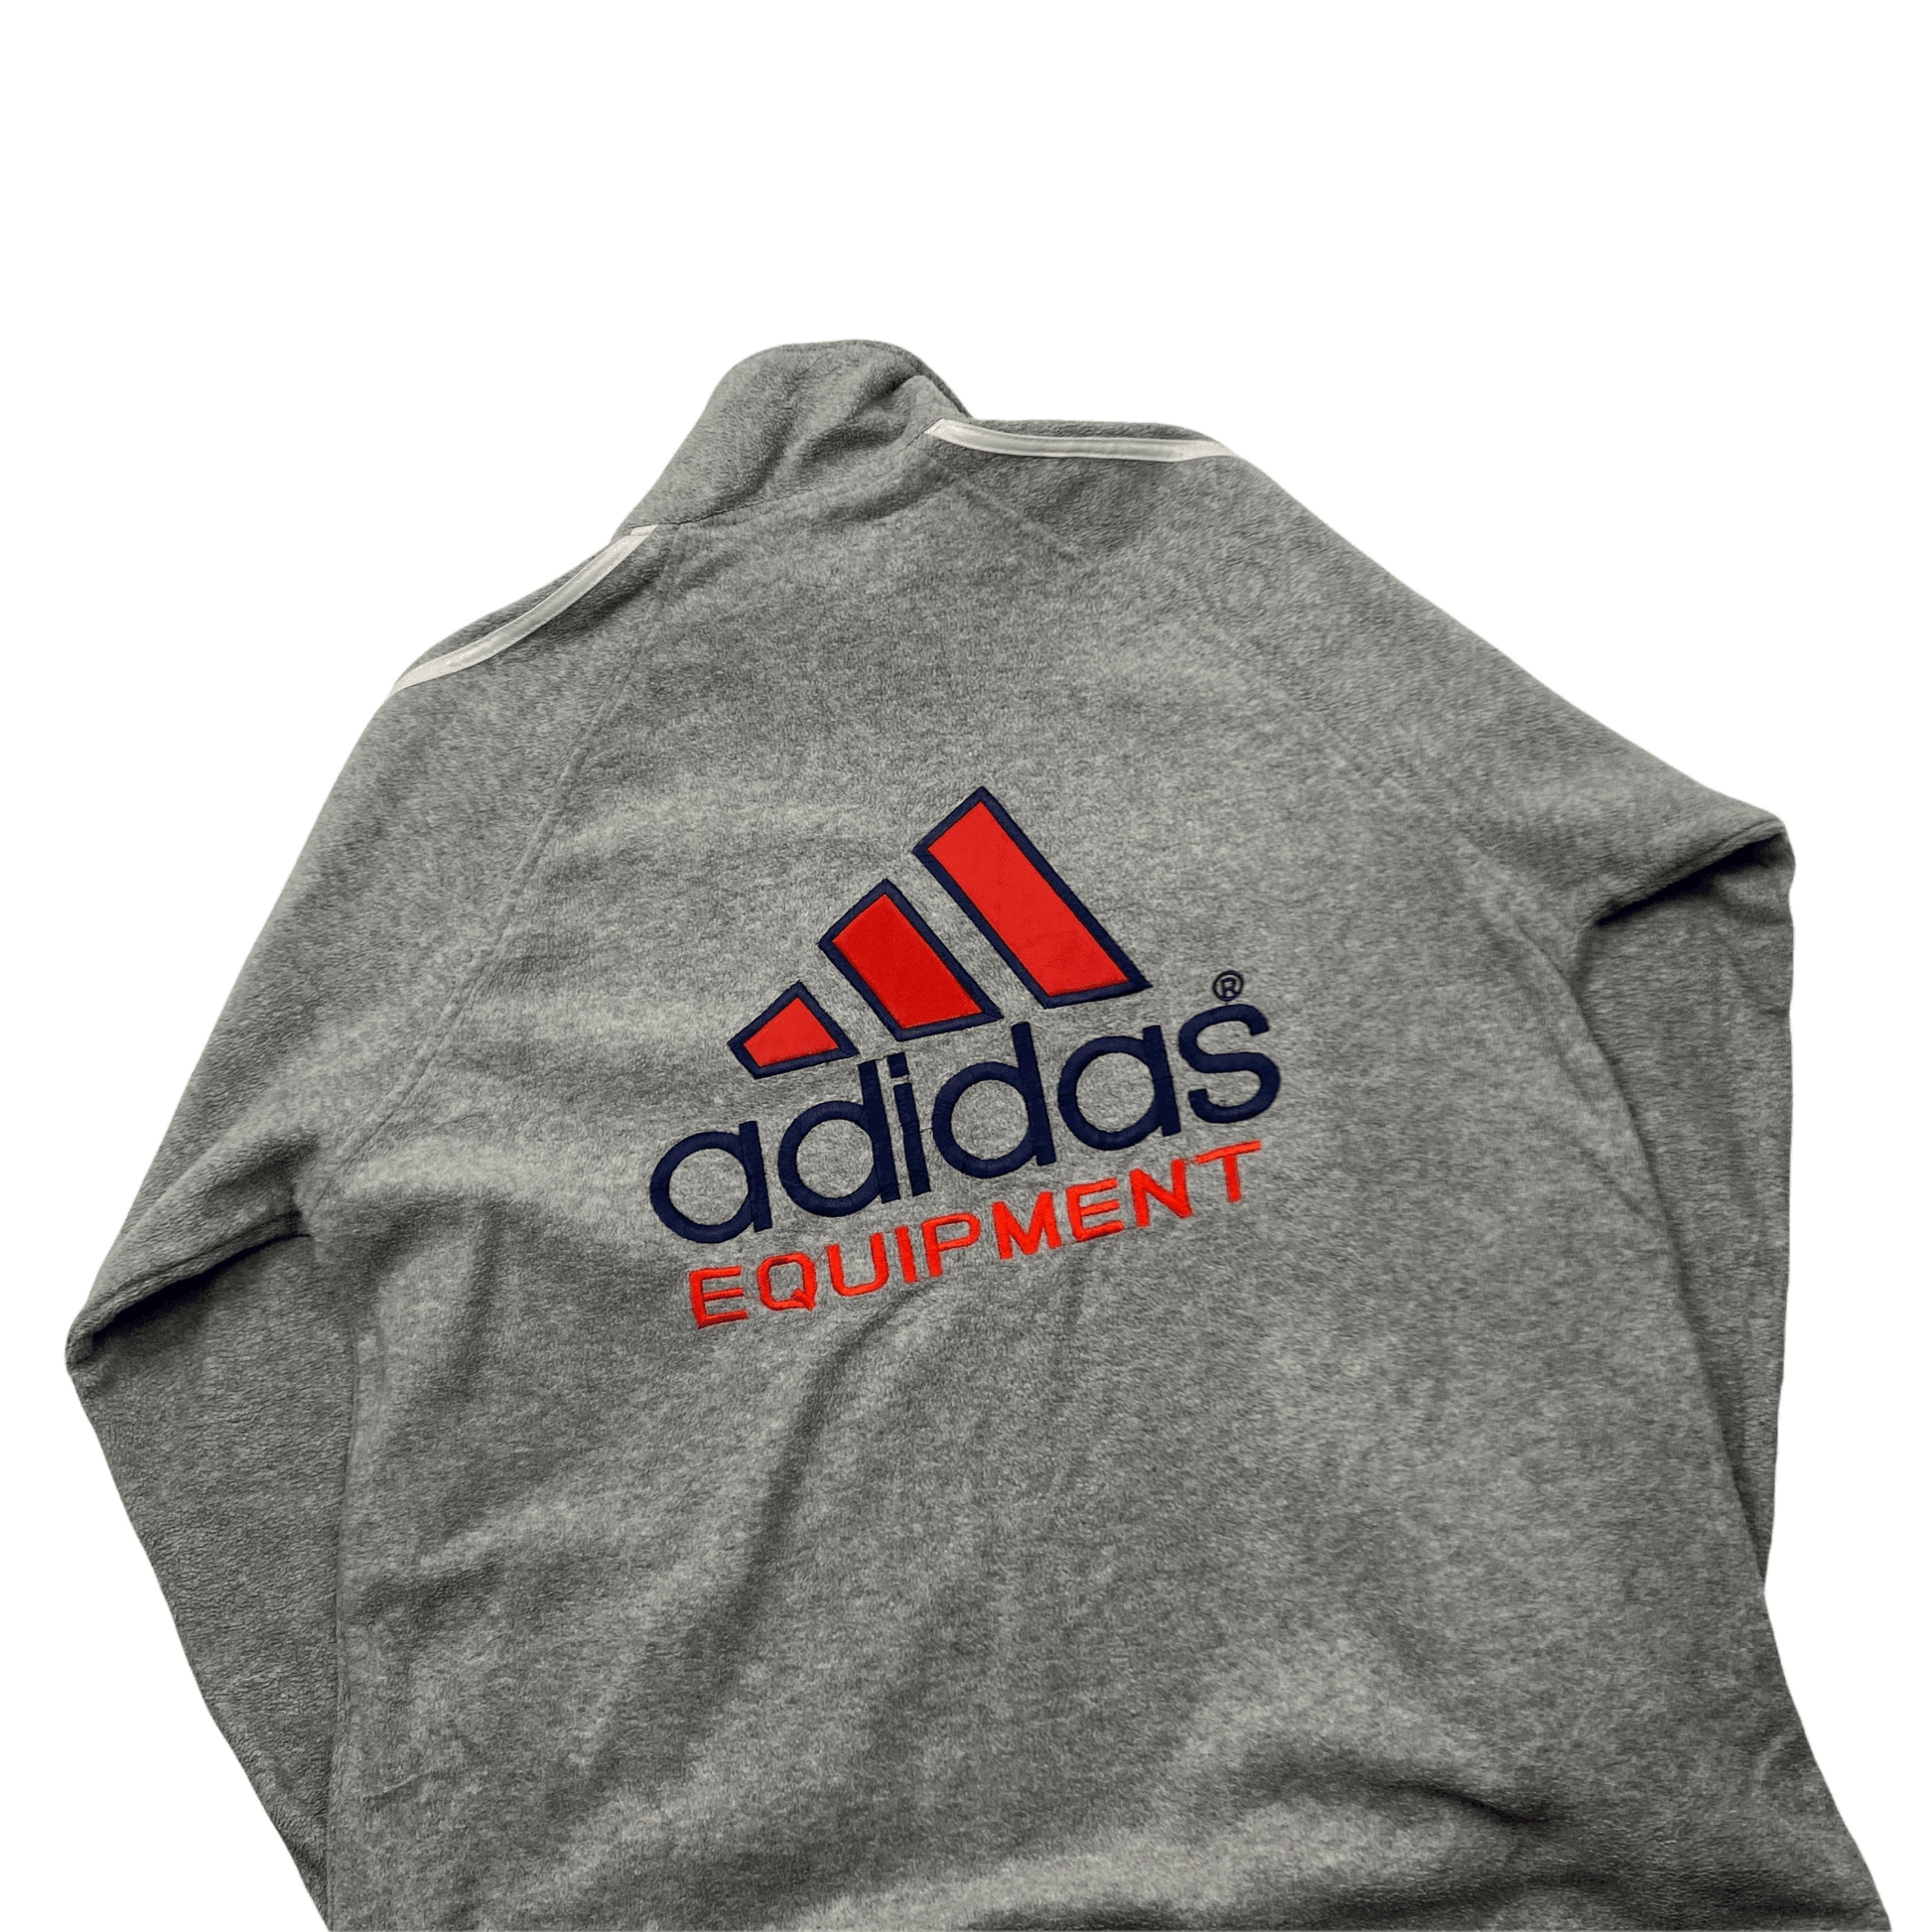 Vintage 90s Grey Adidas Equipment Large Logo Spell-Out Quarter Zip Fleece - Extra Large (Recommended Size - Large) - The Streetwear Studio